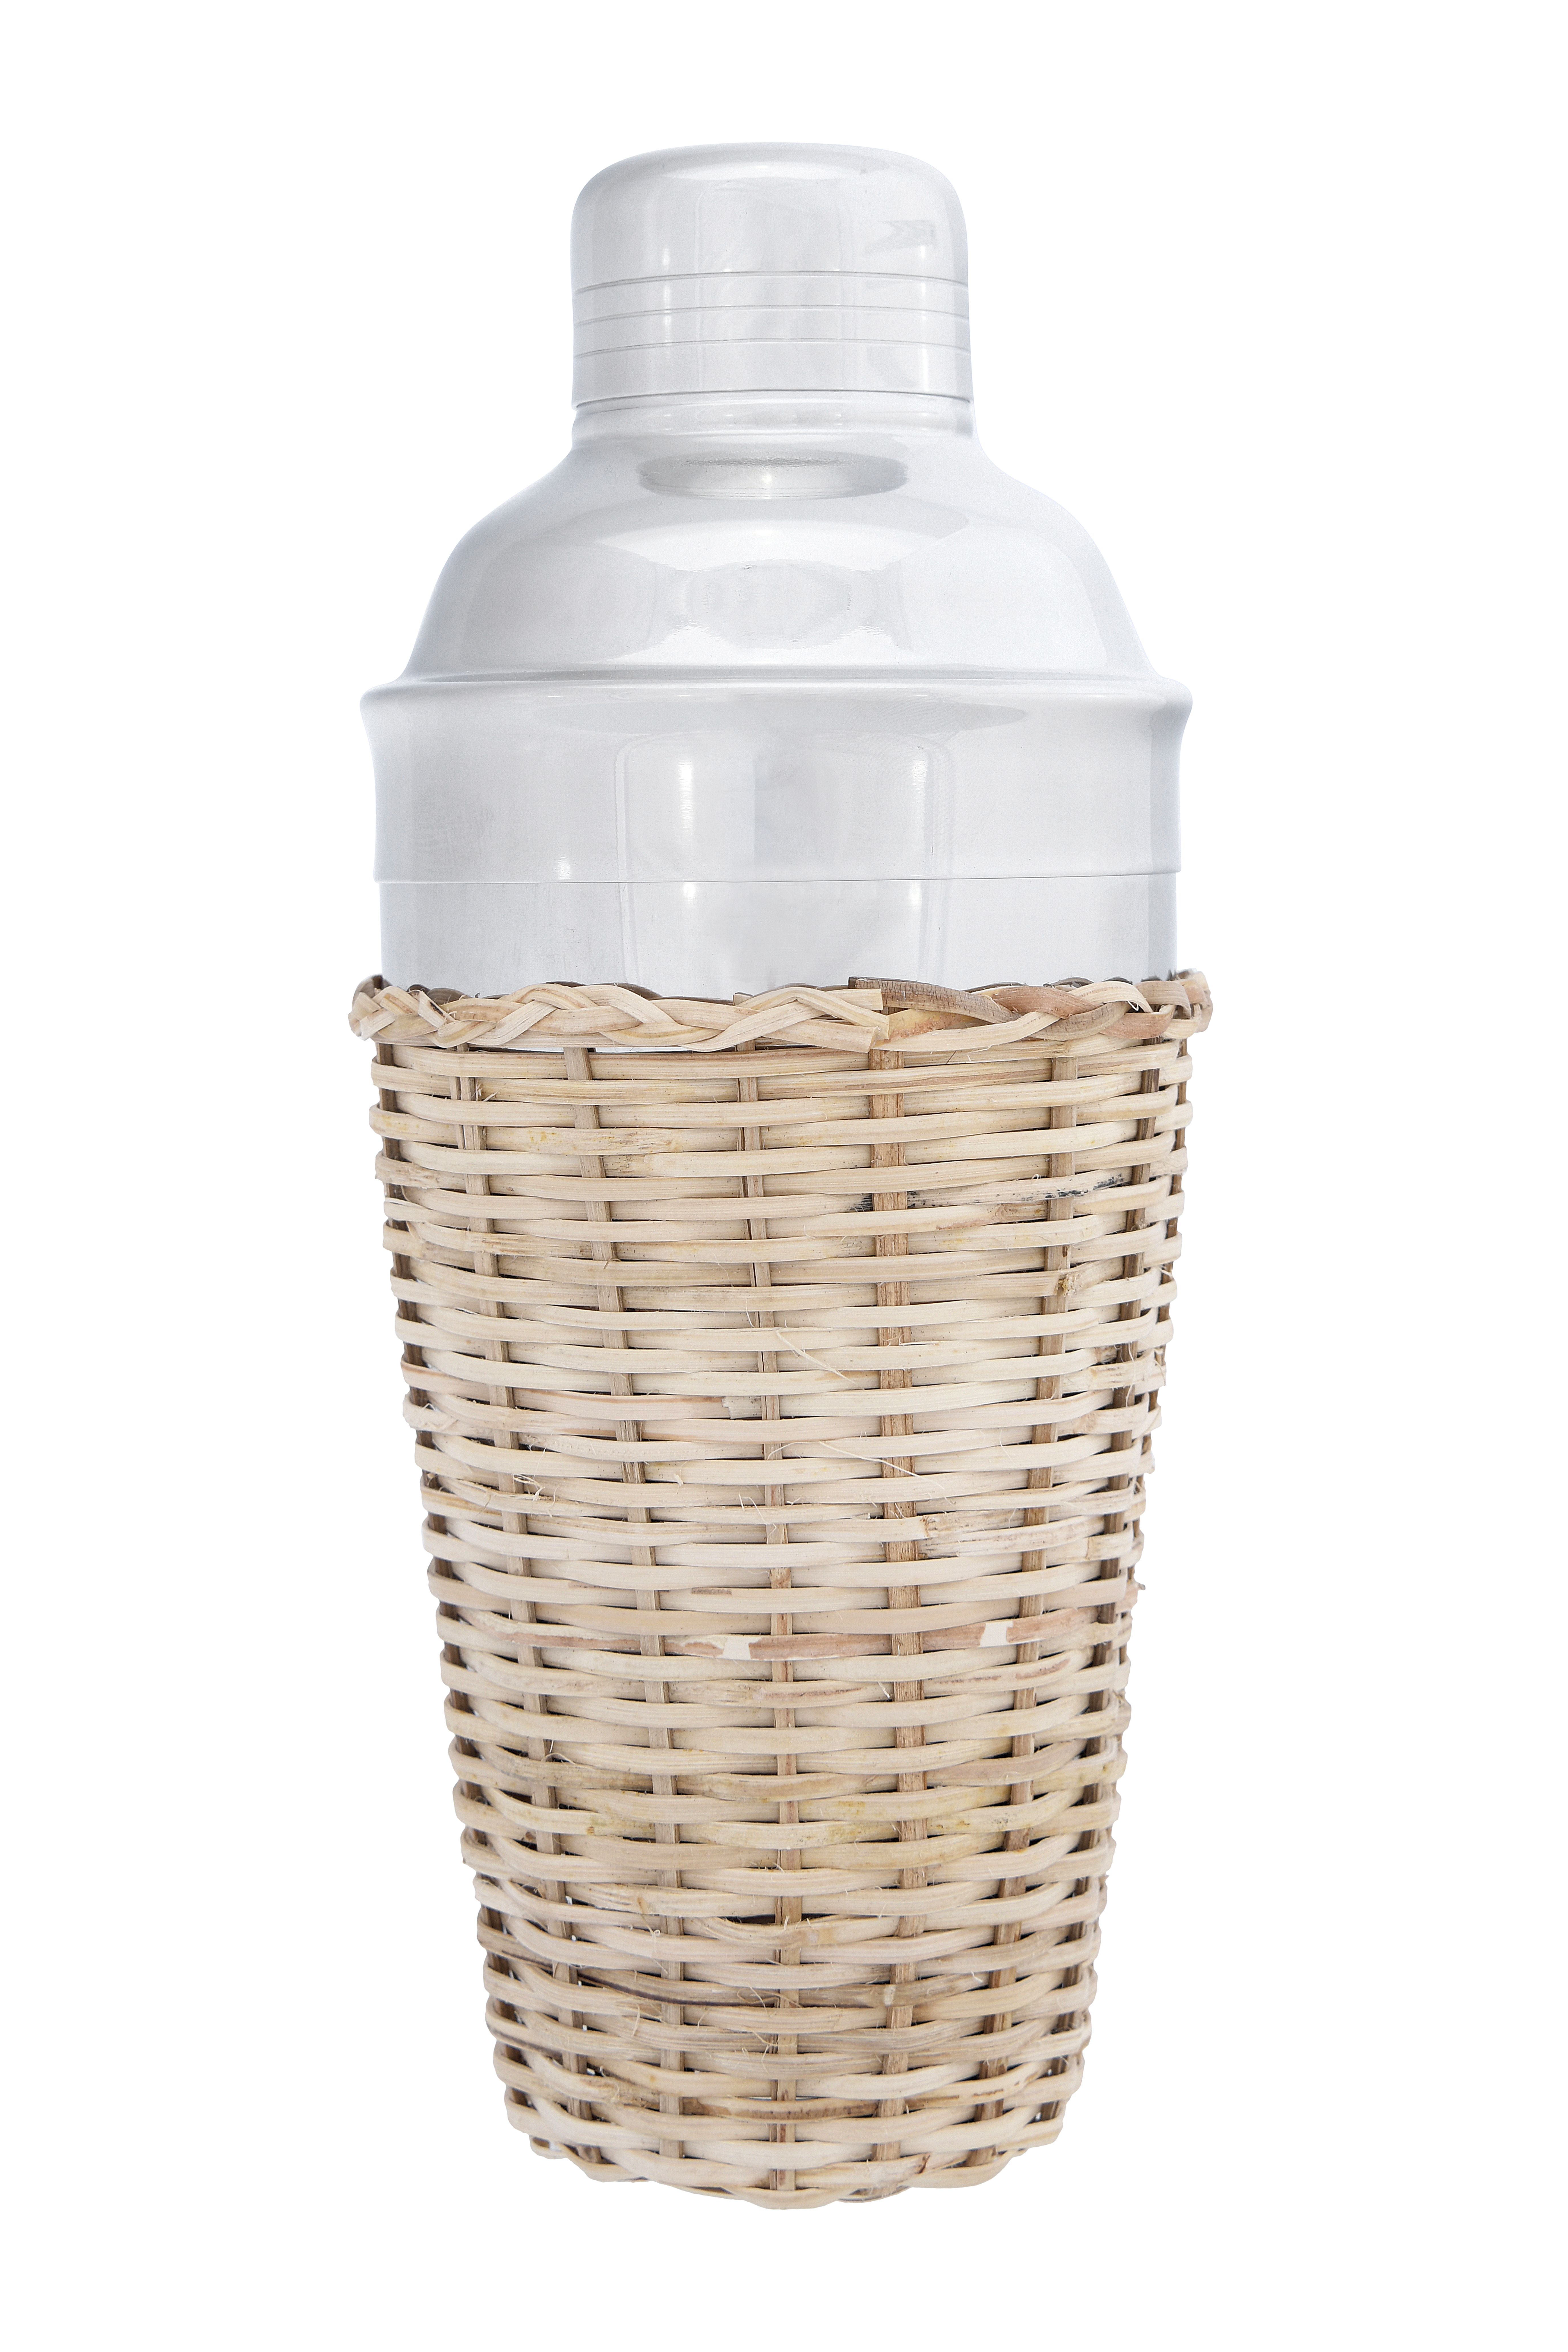 Creative Co-Op 17 oz. Stainless Steel Cocktail Shaker with Woven Rattan Sleeve | Walmart (US)